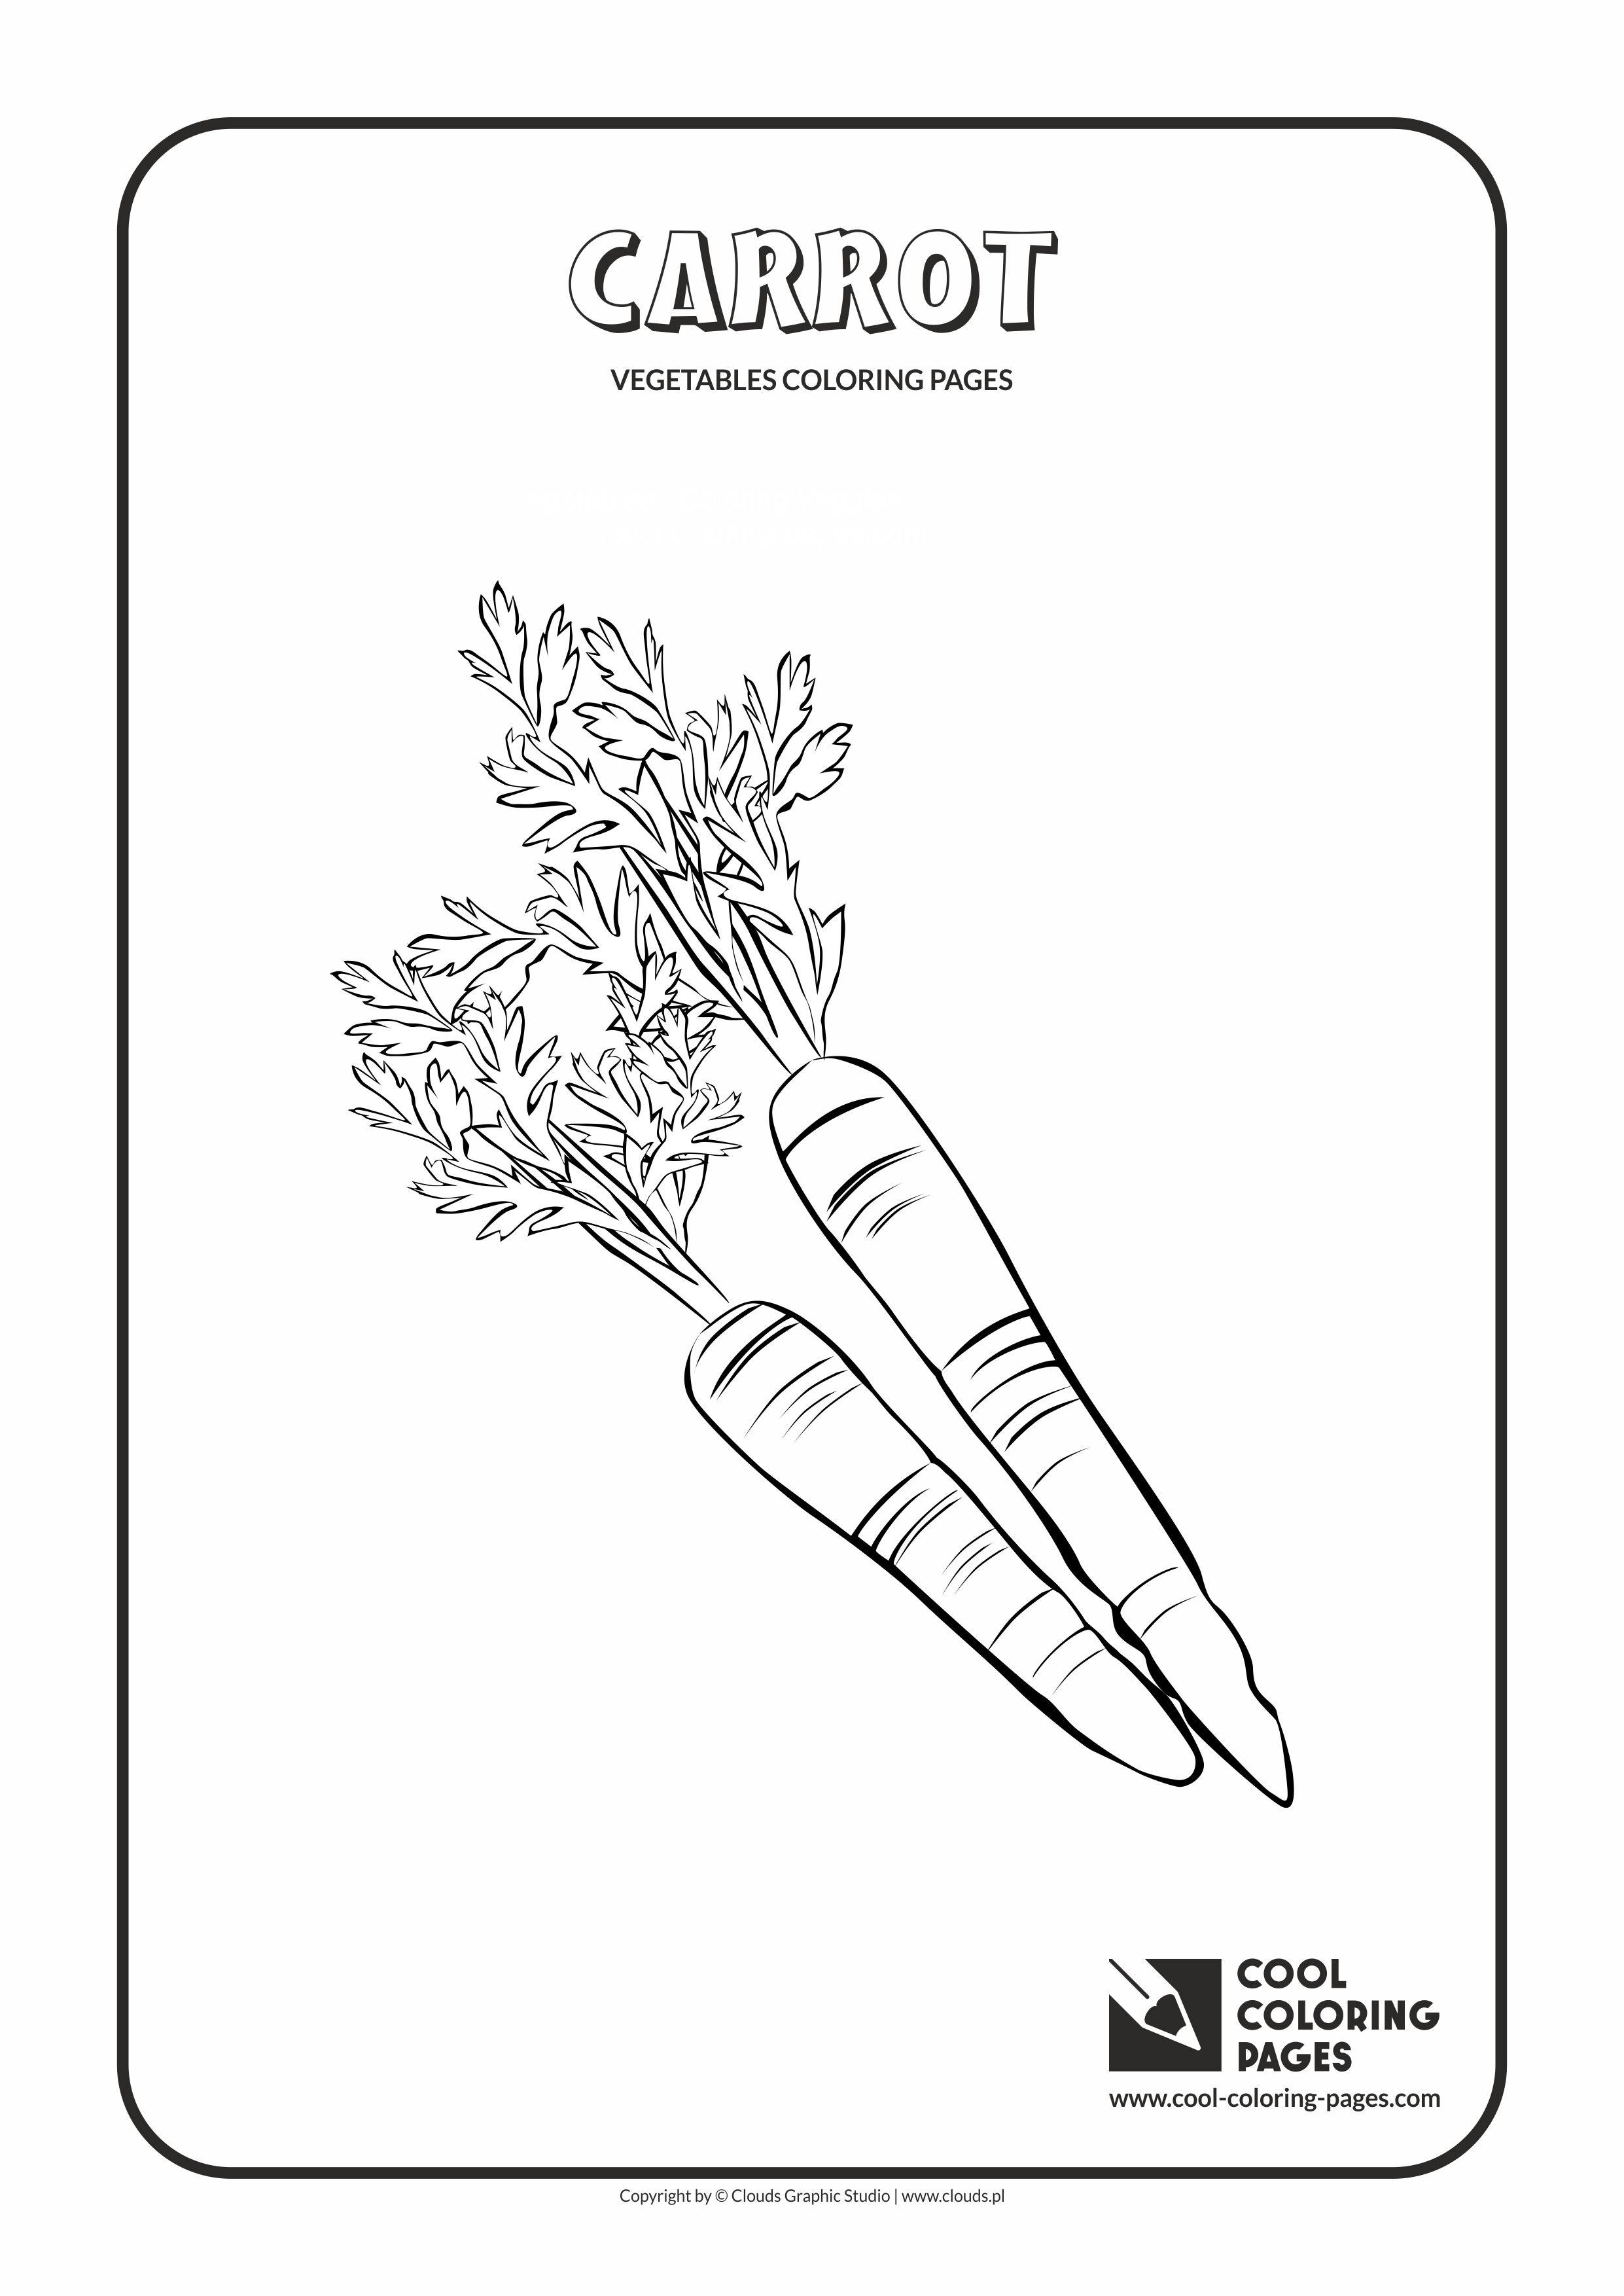 Cool Coloring Pages - Plants / Carrot / Coloring page with carrot